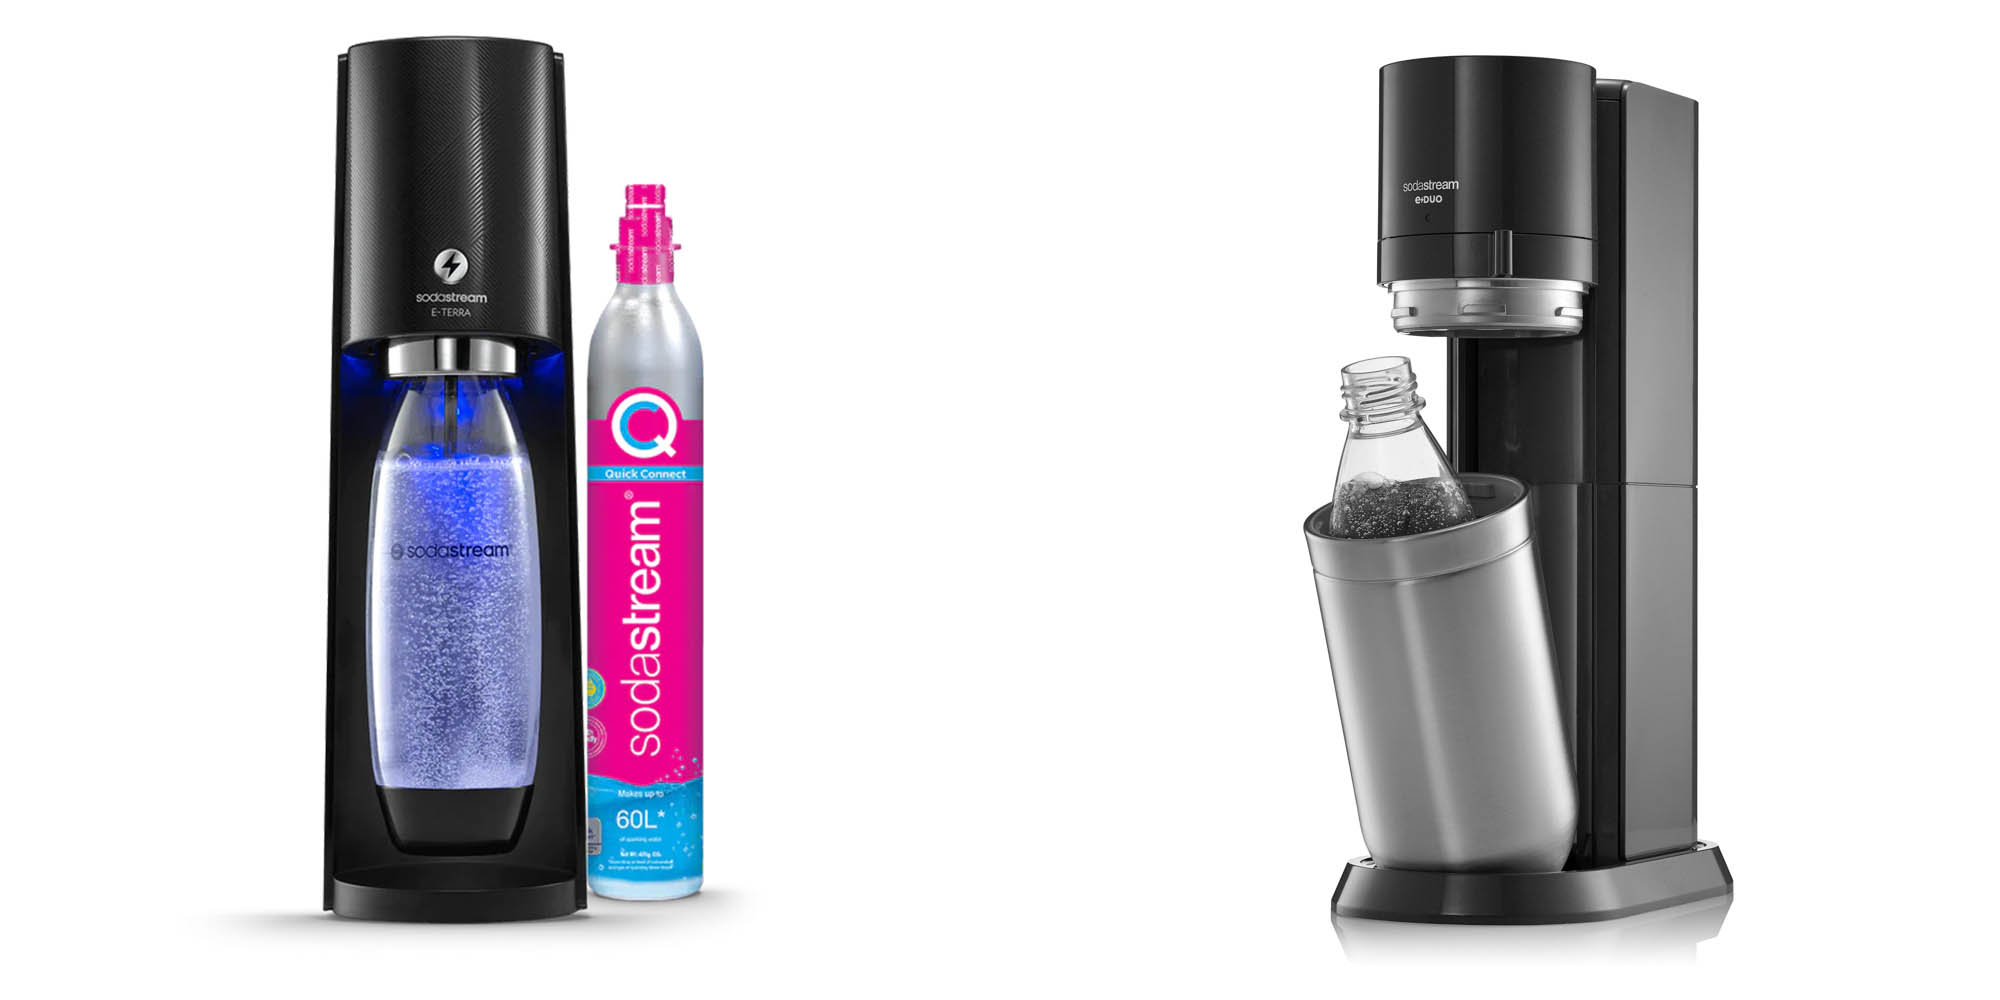 SodaStream's E-TERRA and E-DUO inject carbonation electrically